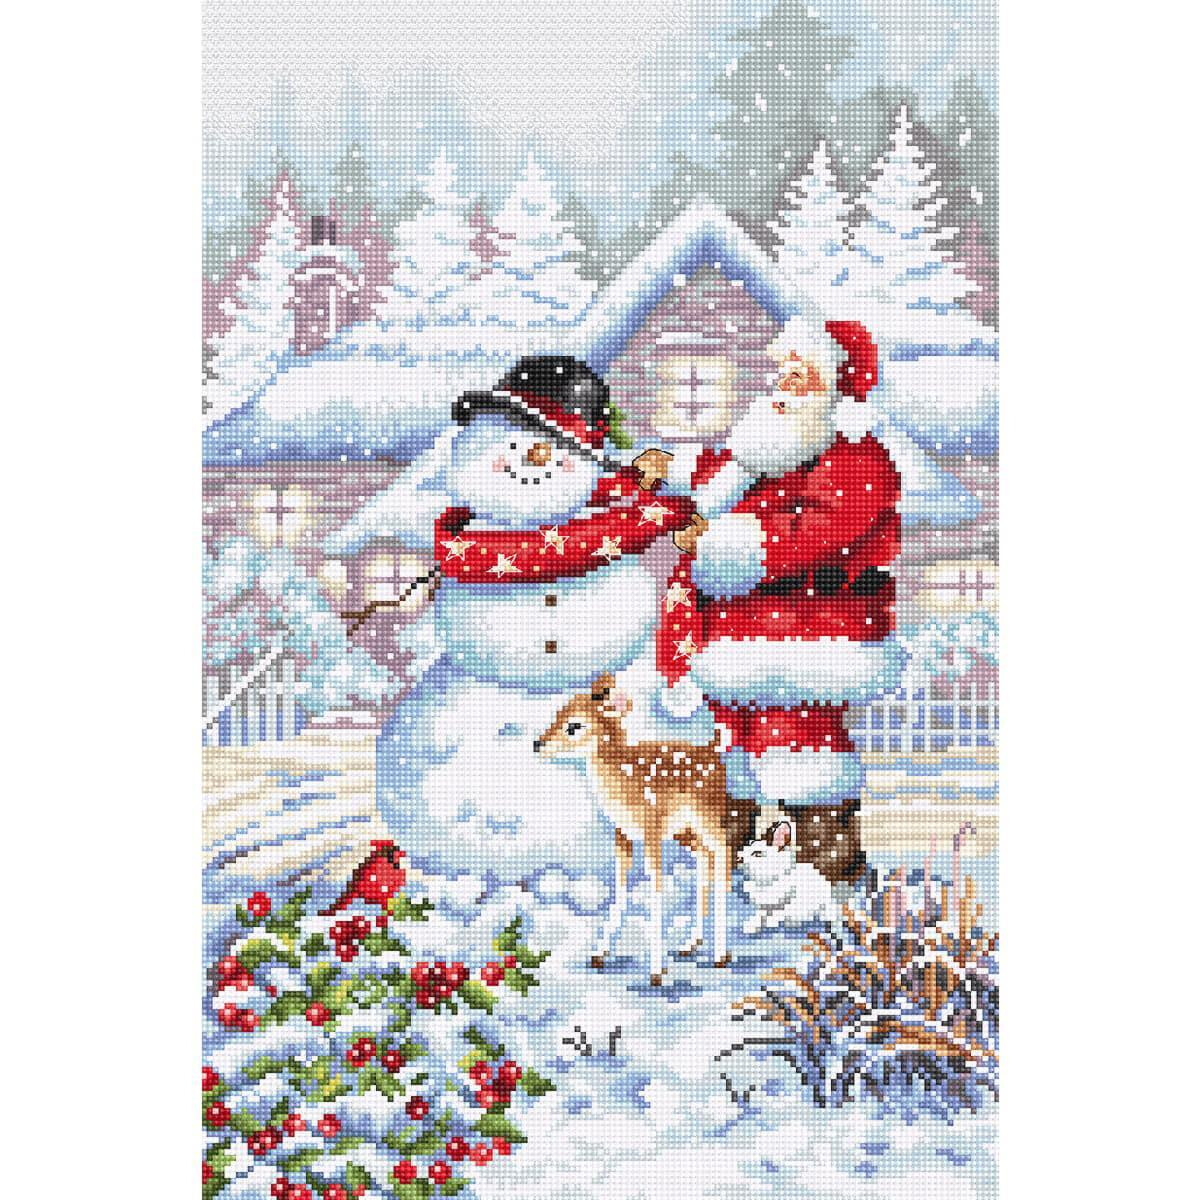 A winter scene shows Santa Claus dressing a snowman with...